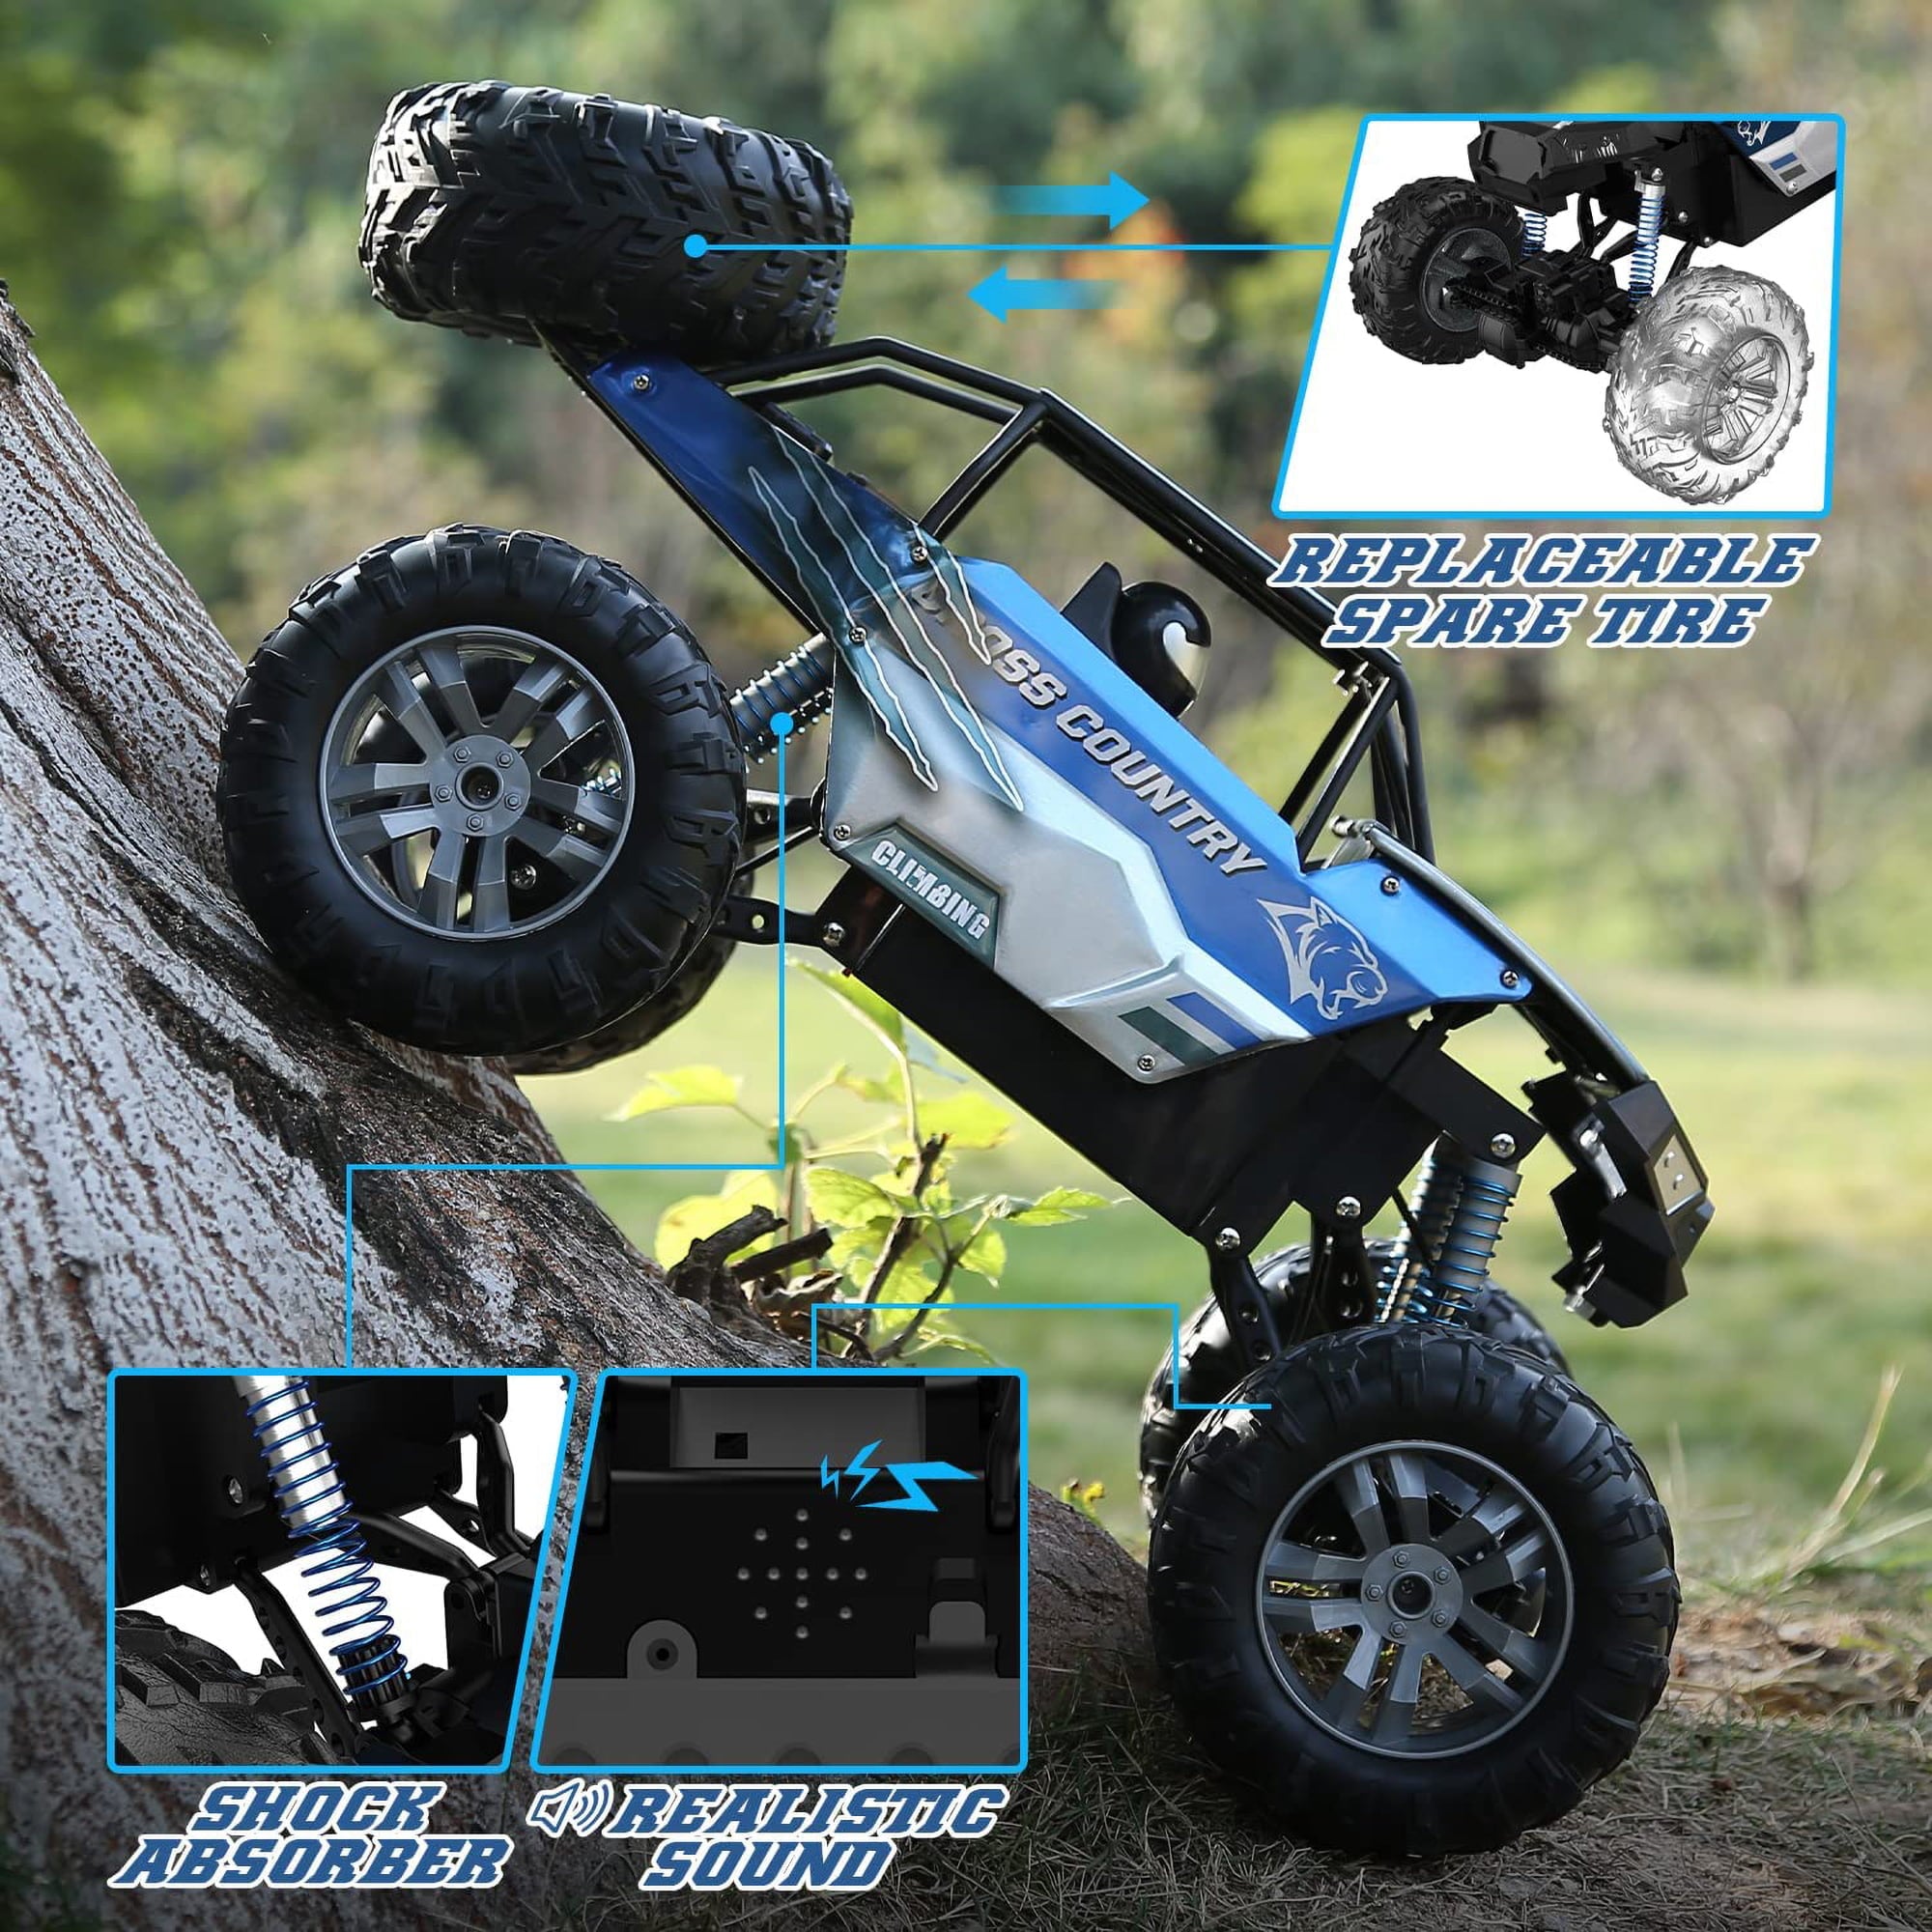 DEERC DE60 Metal Car 1:8 Scale 4WD Remote Control Monster Truck with 2 Batteries for Kids and Adults 2.4Ghz All Terrain Off-Road Vehicle